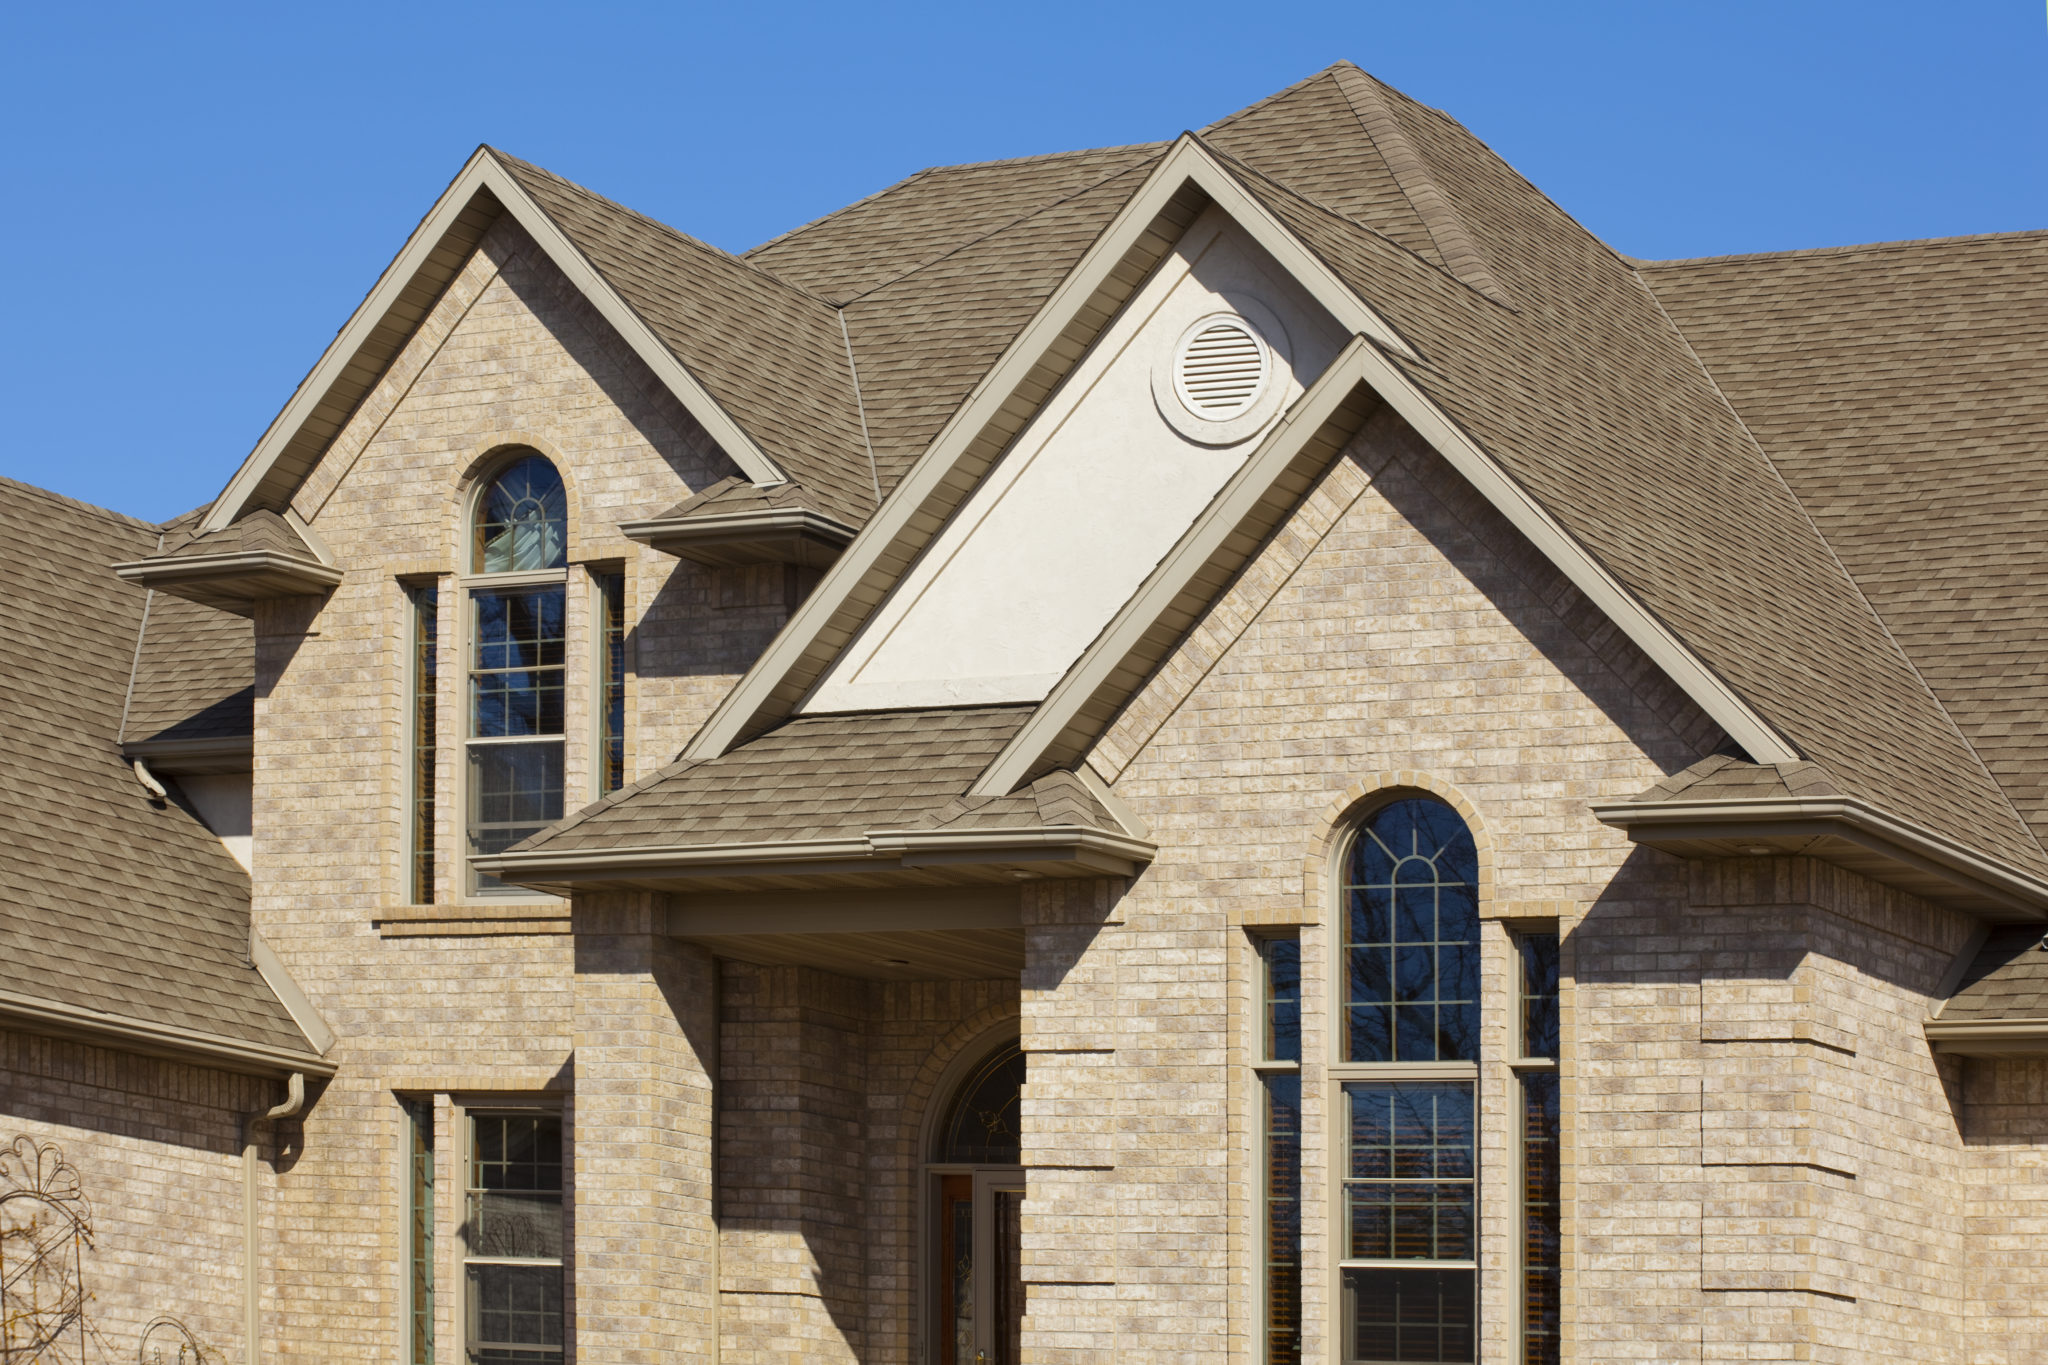 Lenox Roofing Solutions: One of the Best Roofing Solution Providers